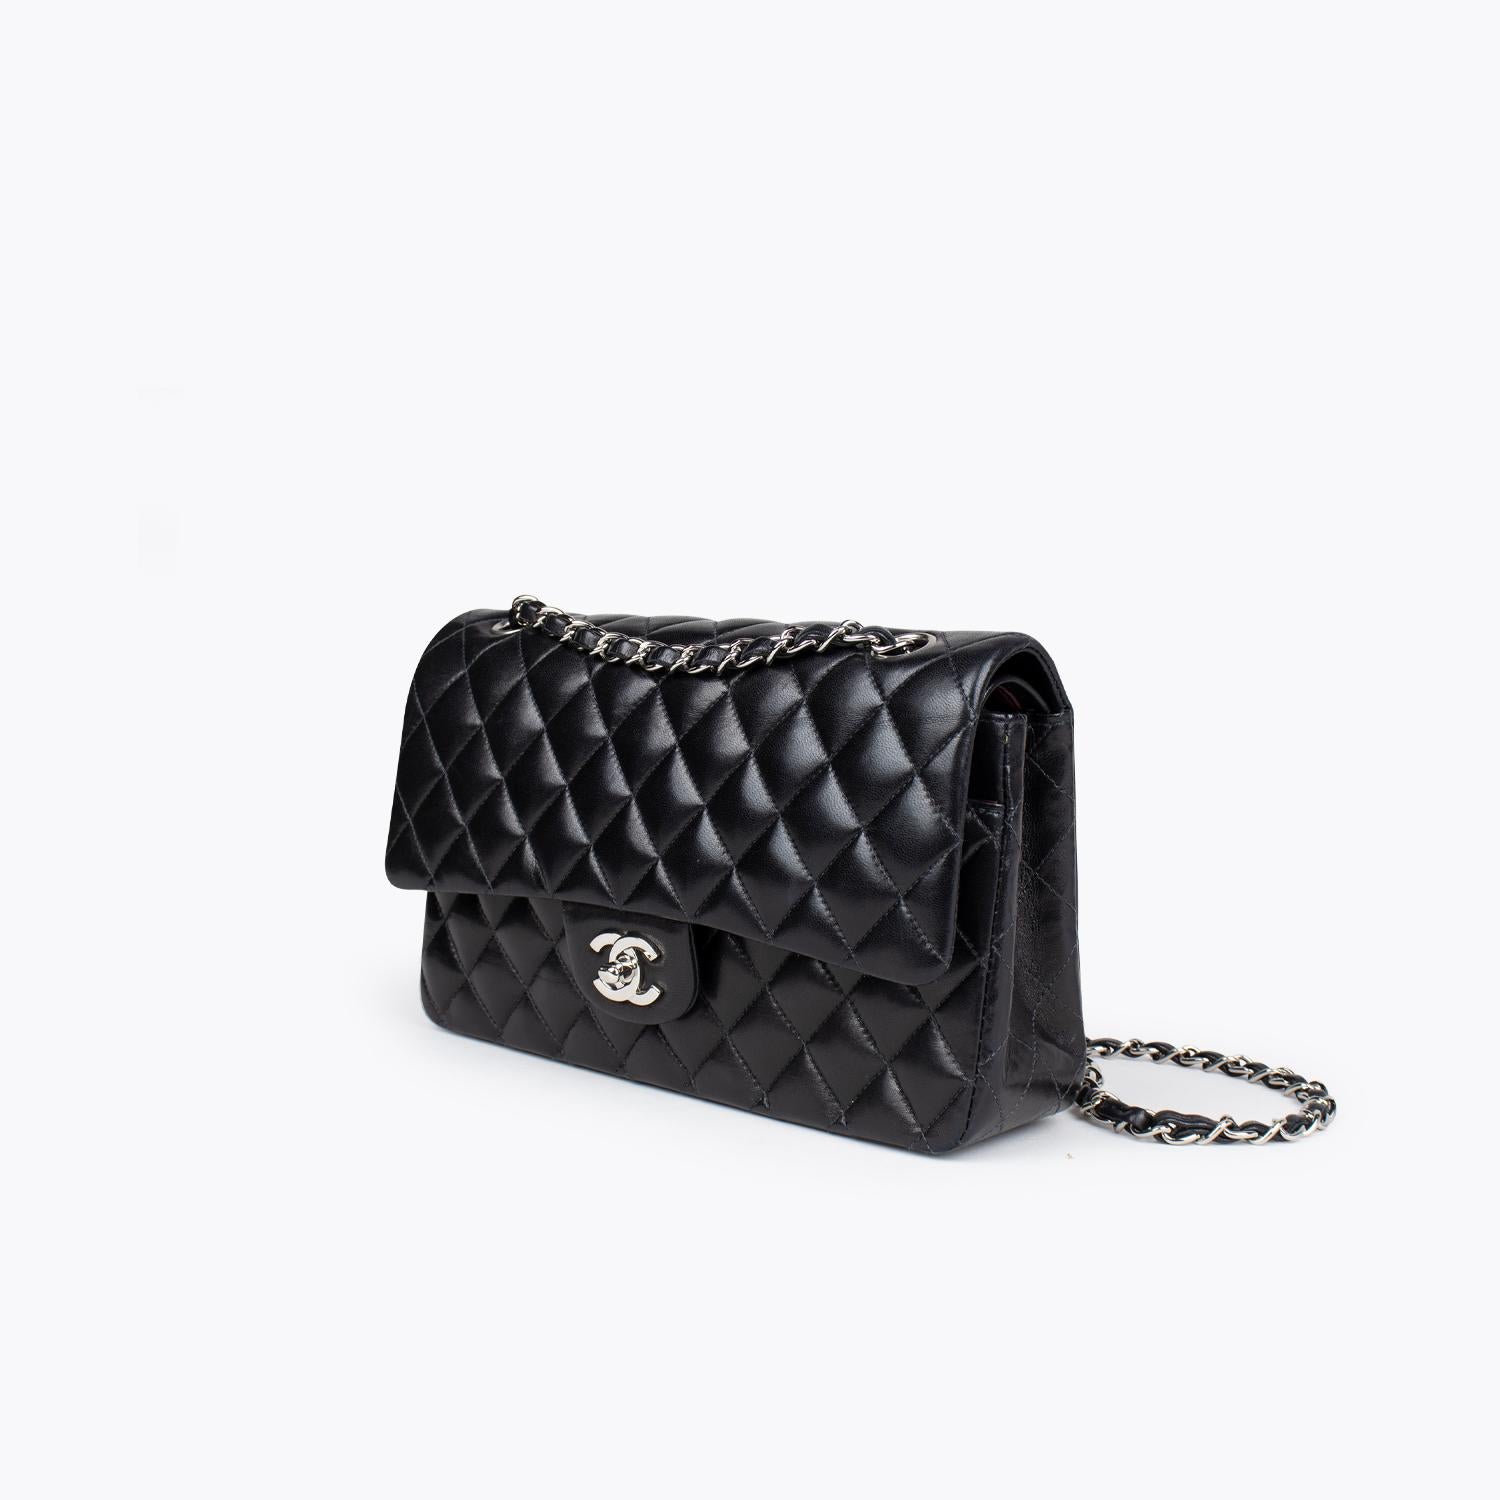 Black quilted lambskin Chanel Medium Classic/Timeless Double Flap bag with

– Silver-tone hardware
– Convertible chain-link and leather shoulder strap
– Burgundy leather lining
– Single patch pocket at back
– Single zip pocket at flap underside,